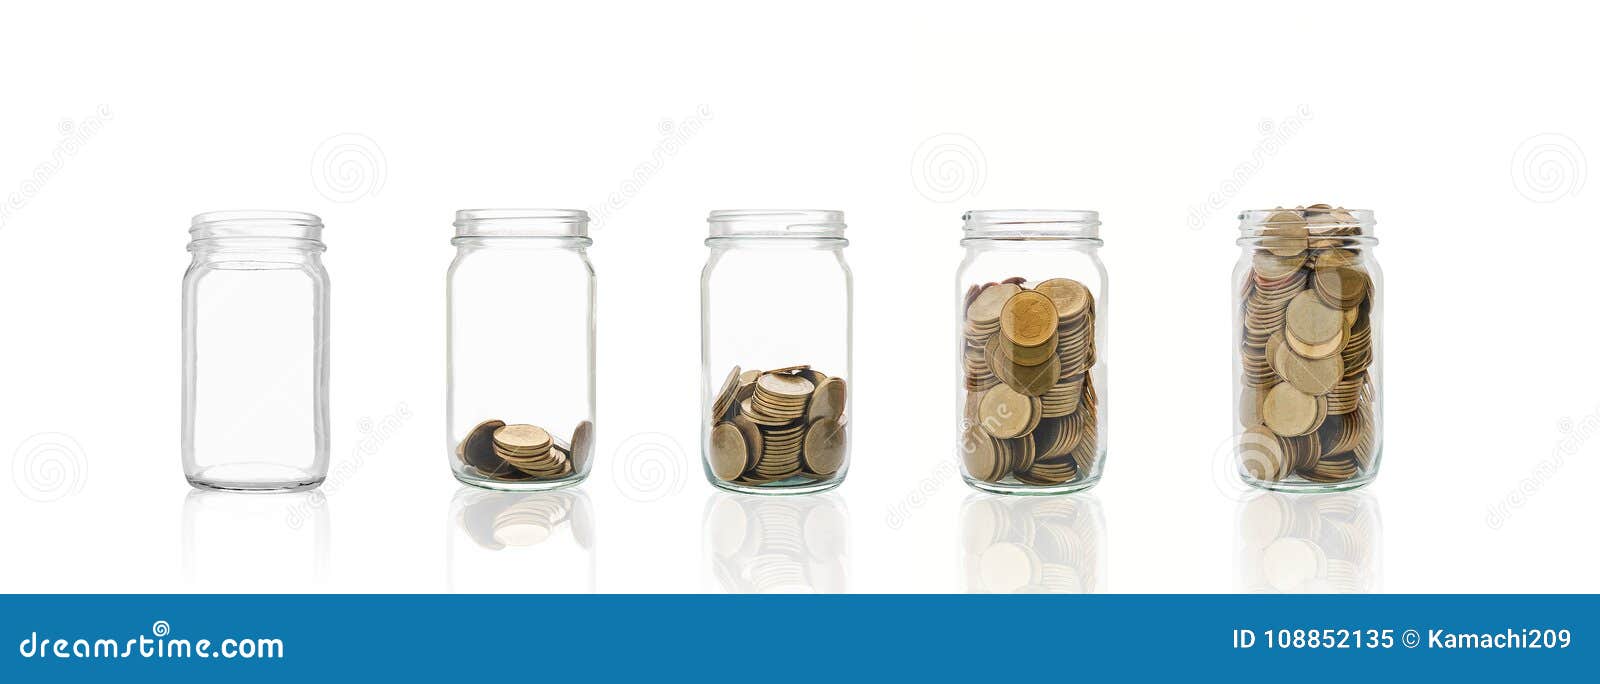 coins in a bottle, represents the financial growth. the more money you save, the more you will get.